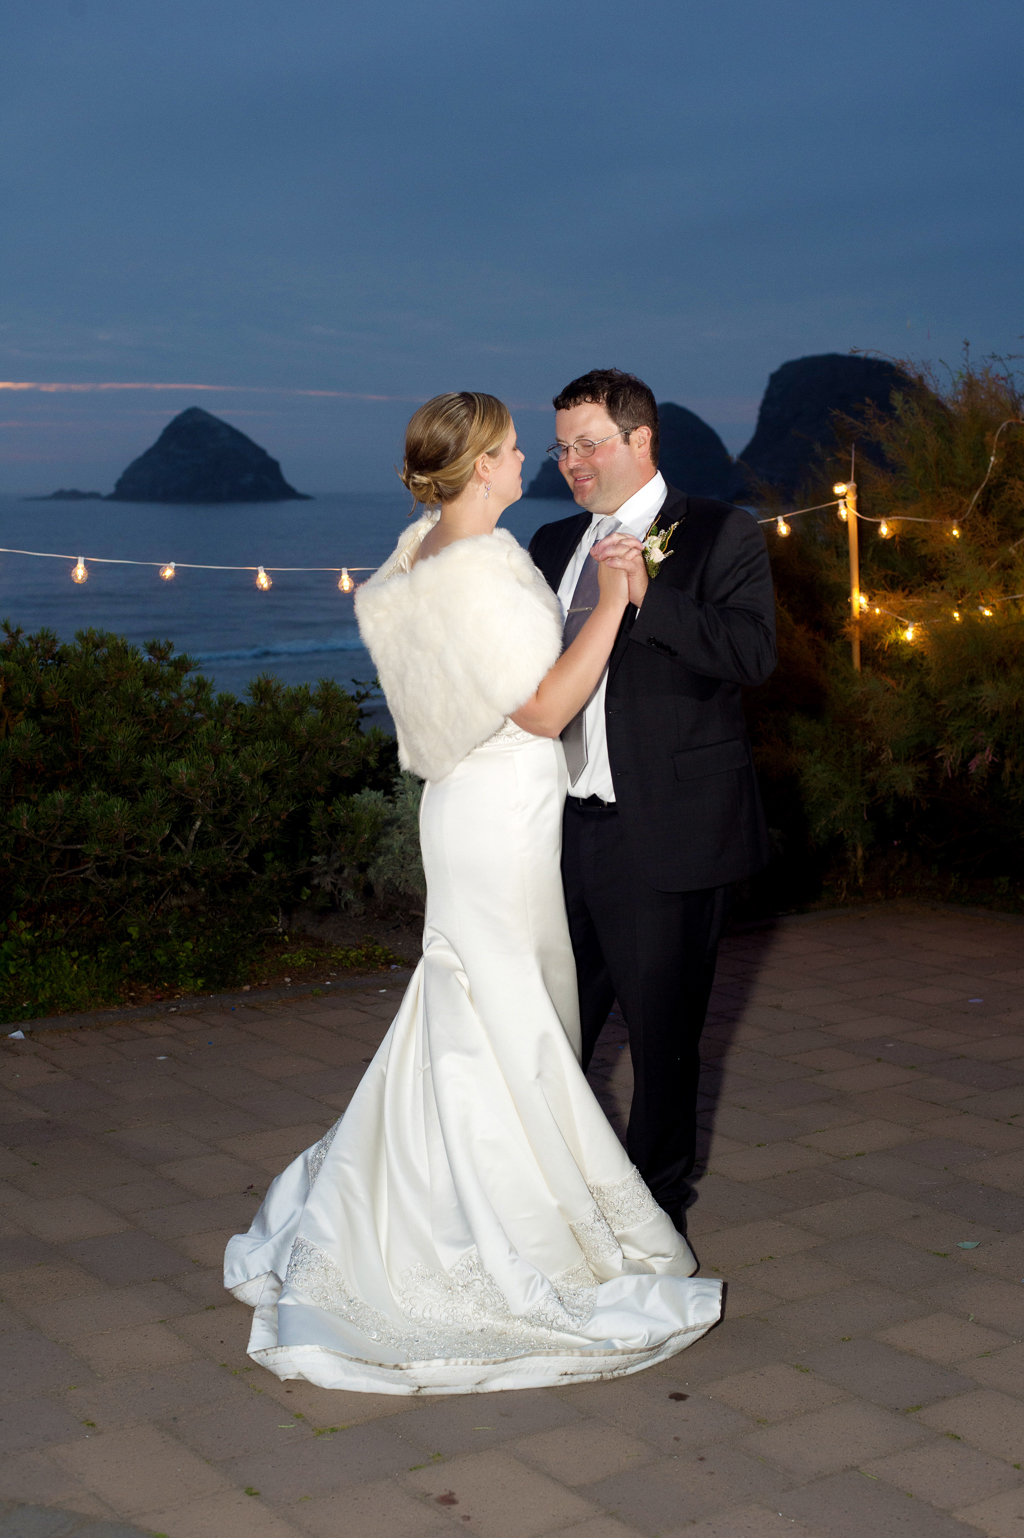 a bride wearing a white fur shawl and groom have their first dance surrounded by cafe lights with the pacific ocean in the background